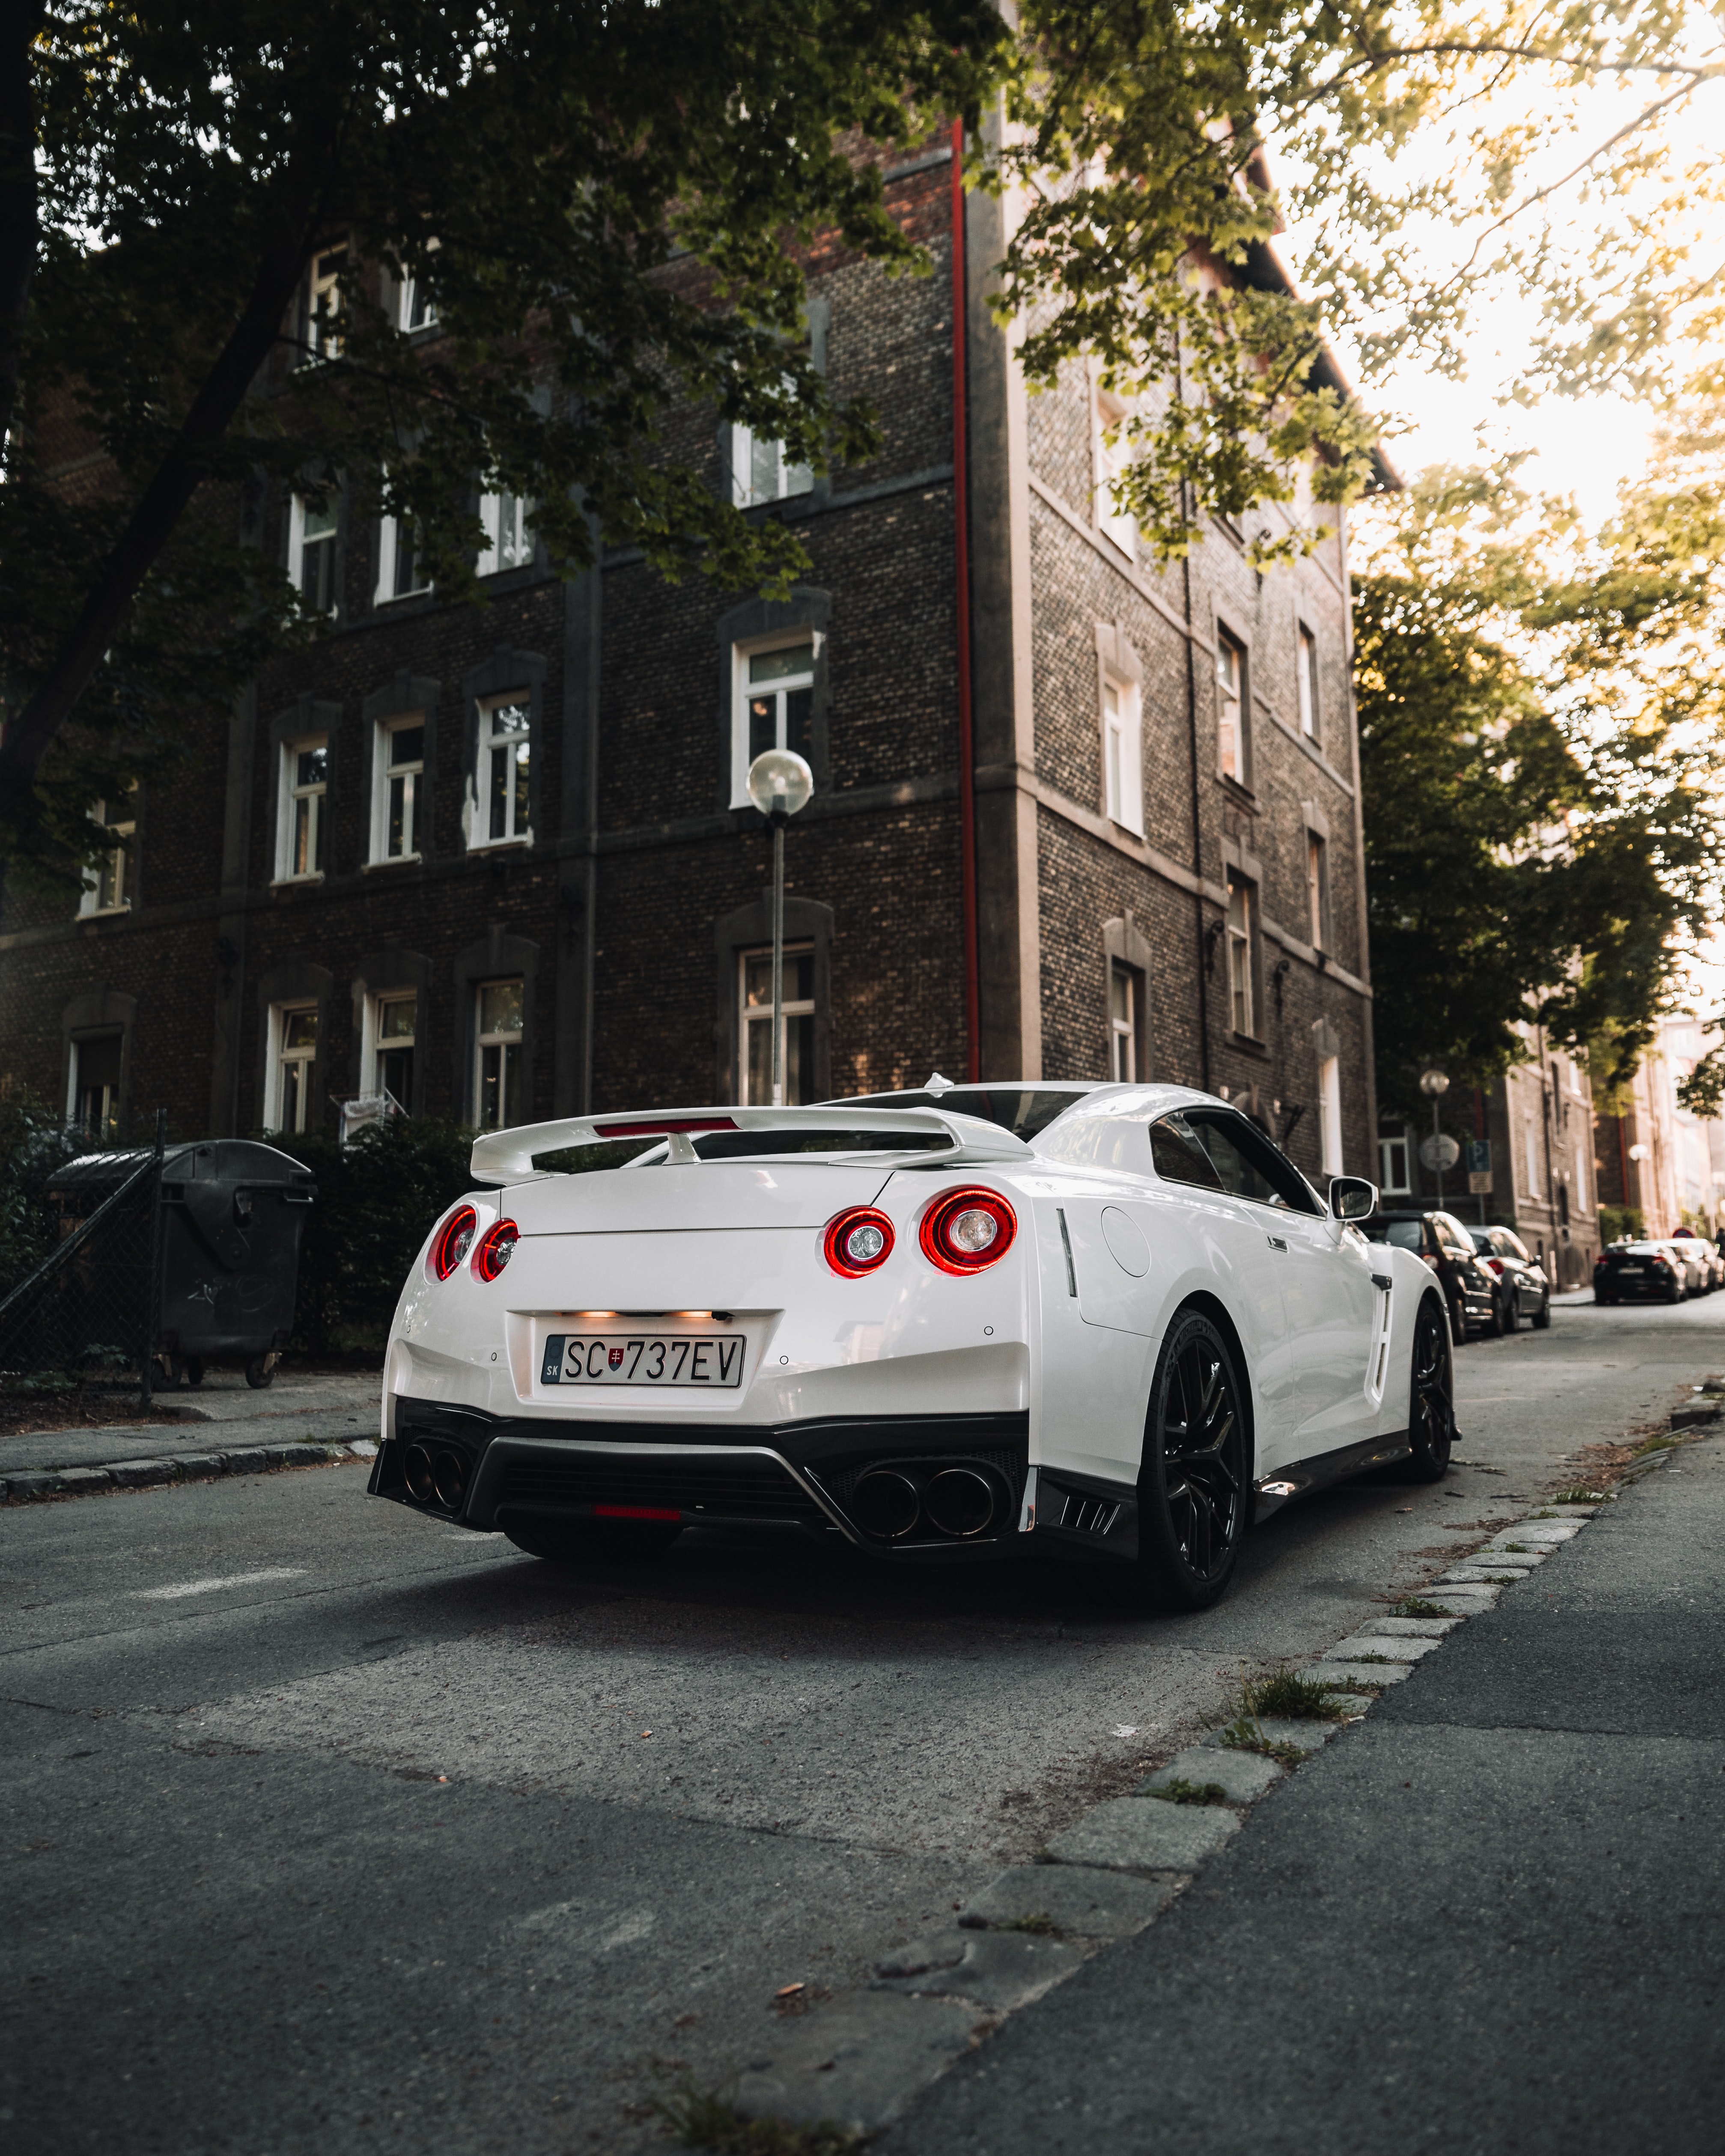 nissan gt-r, sports car, sports, nissan, cars, car, back view, rear view images